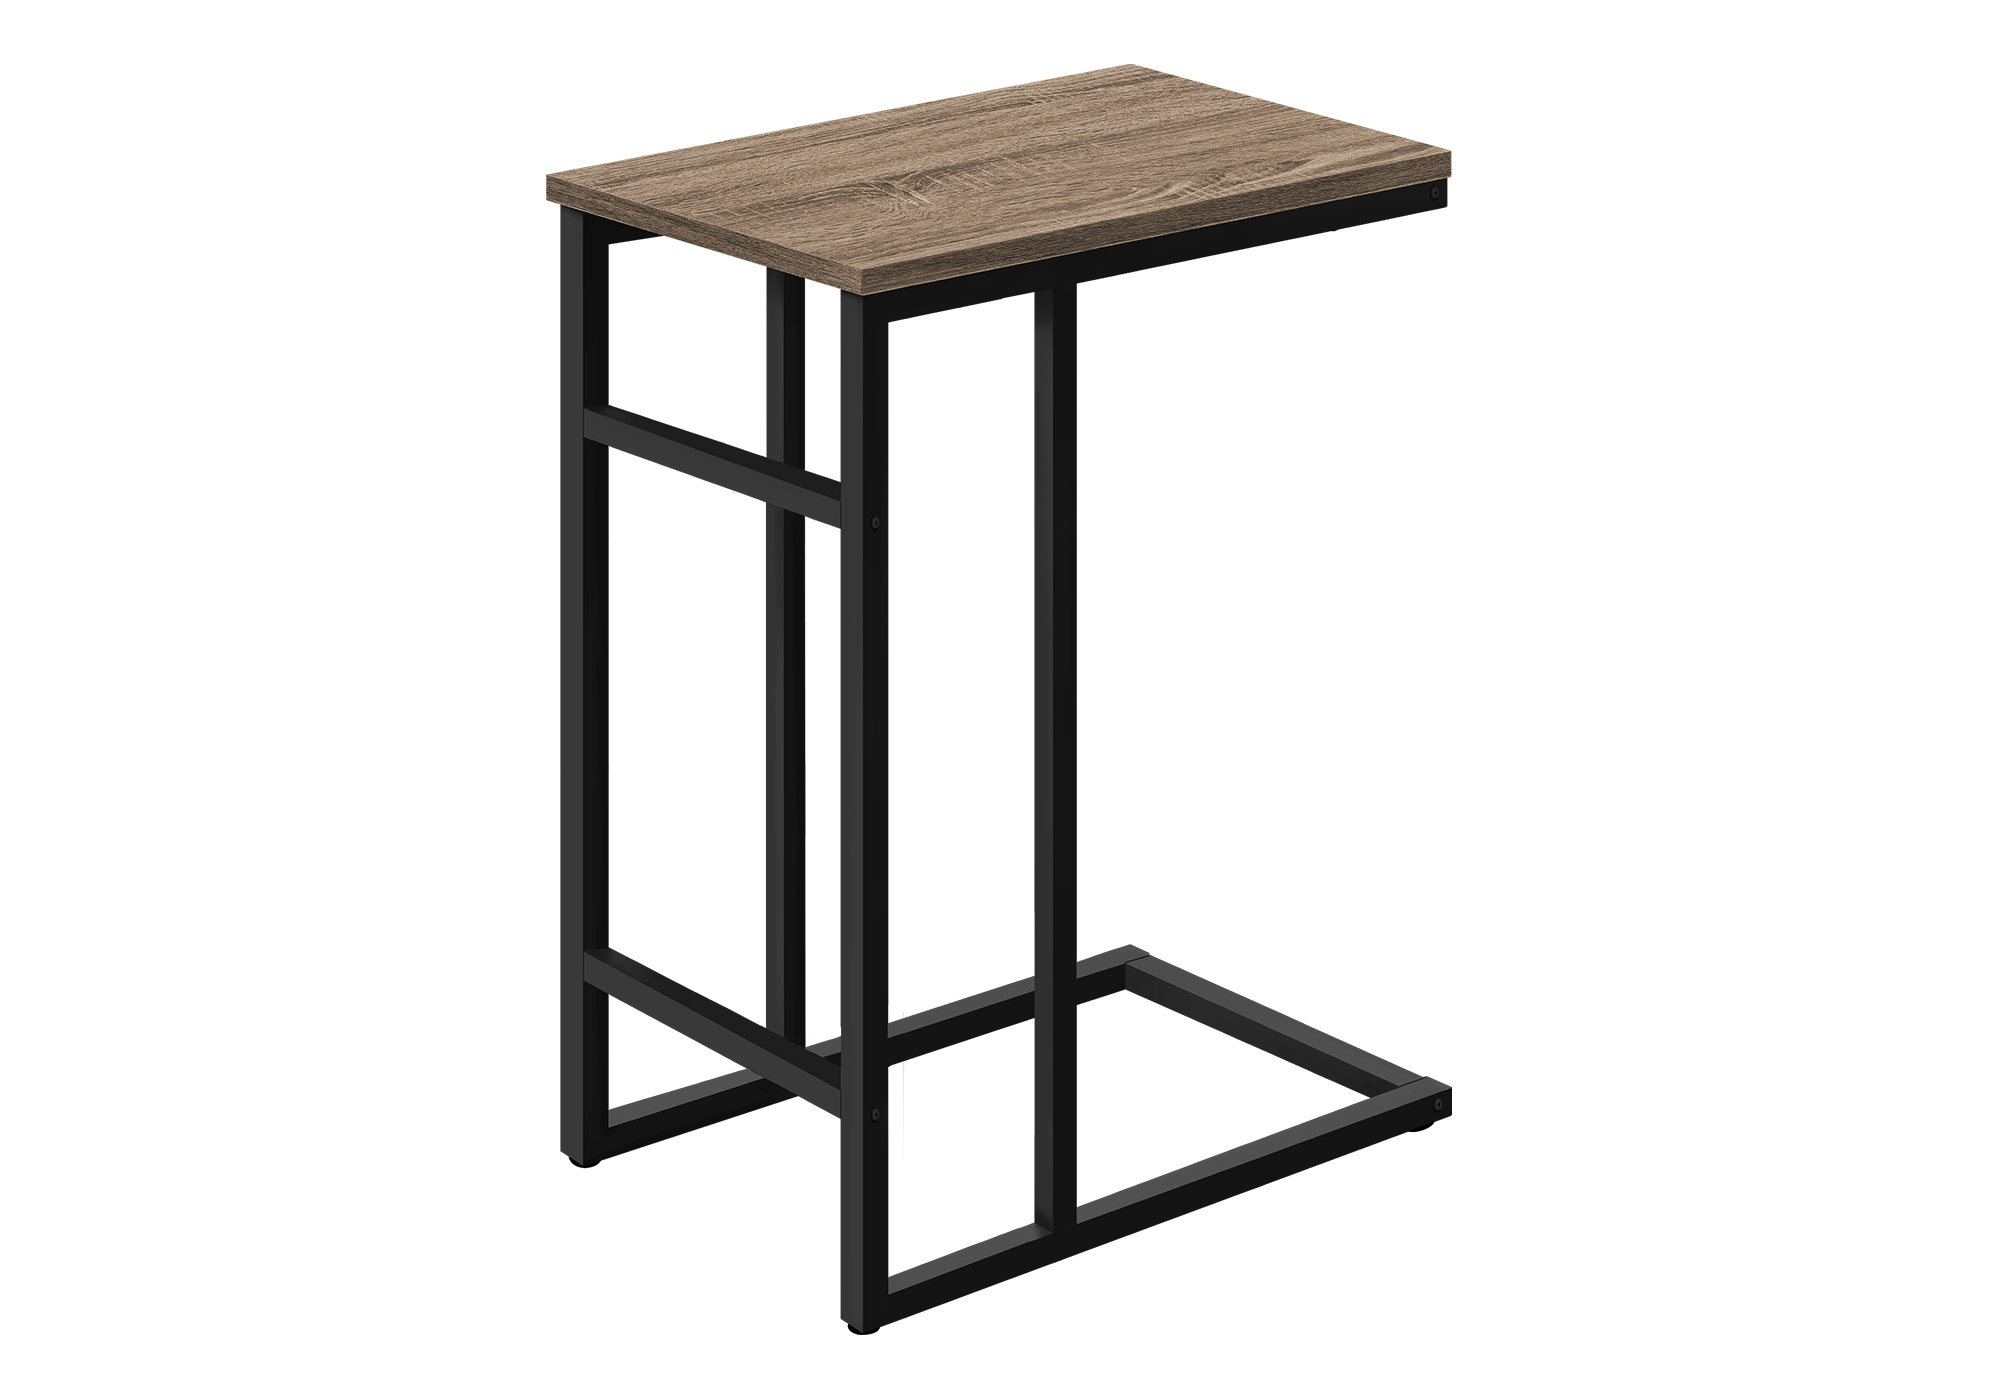 ACCENT TABLE - 24"H / DARK TAUPE / BLACK METAL